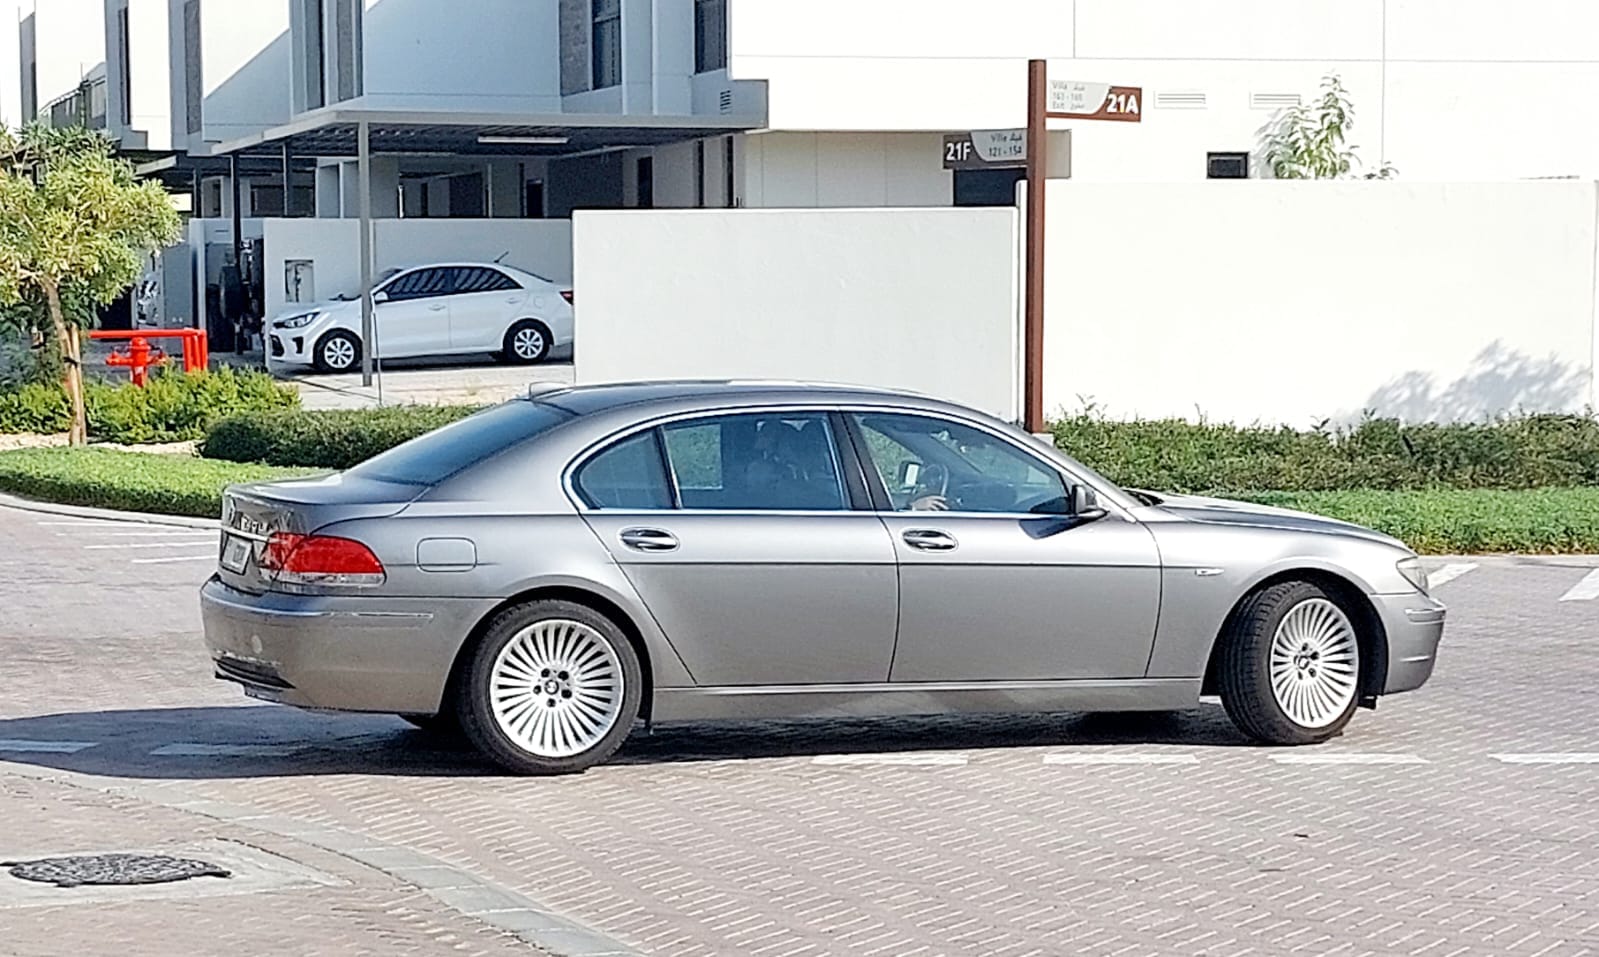 BMW 740li 2008, less driven, orignal paint, highly maintained, d